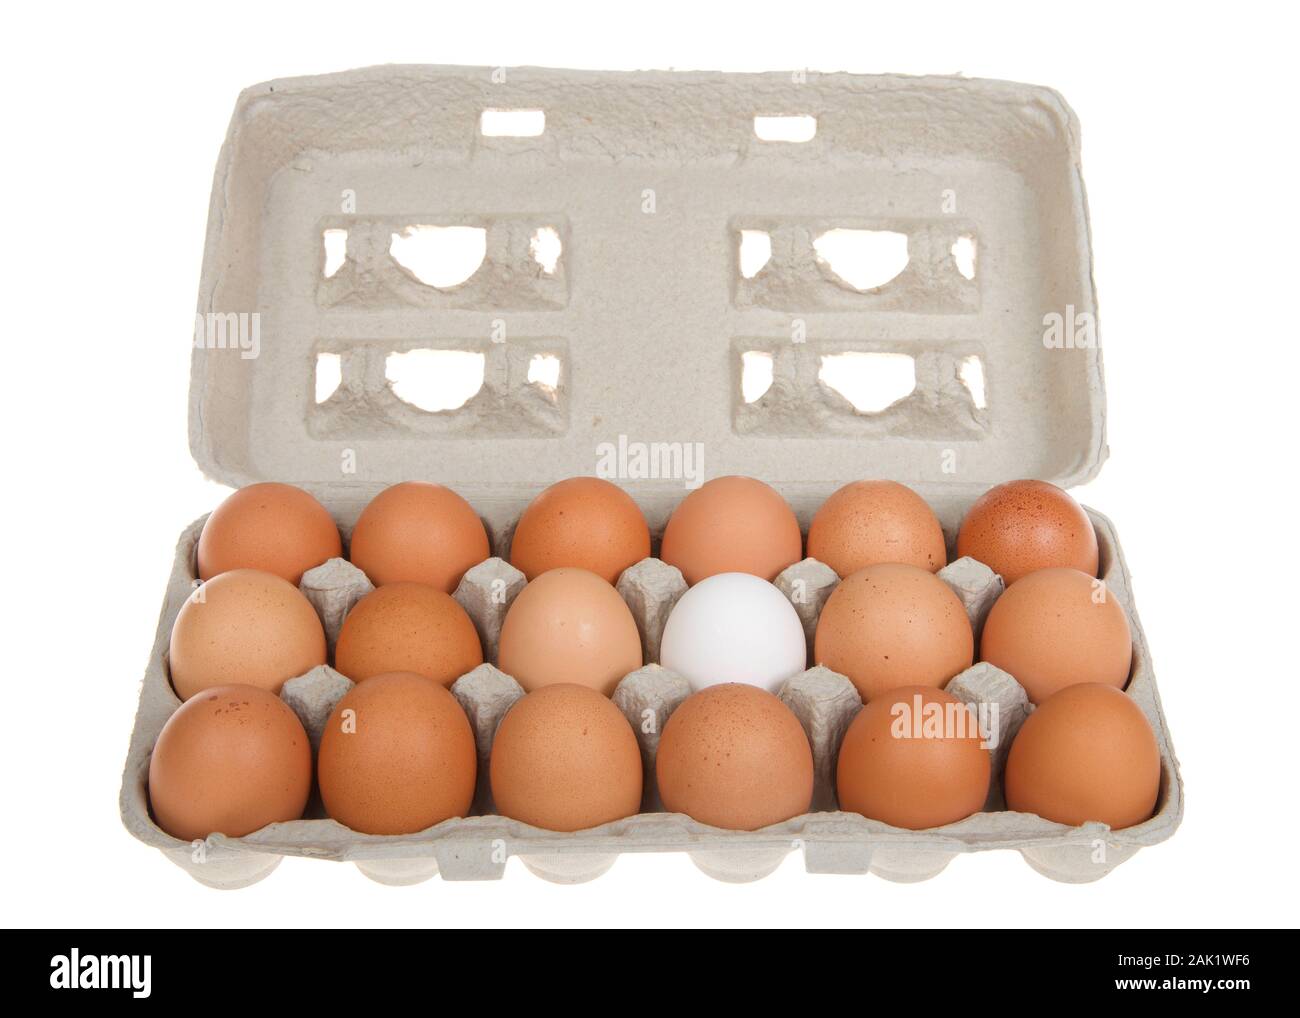 Carton of brown eggs with one white egg. Stock Photo